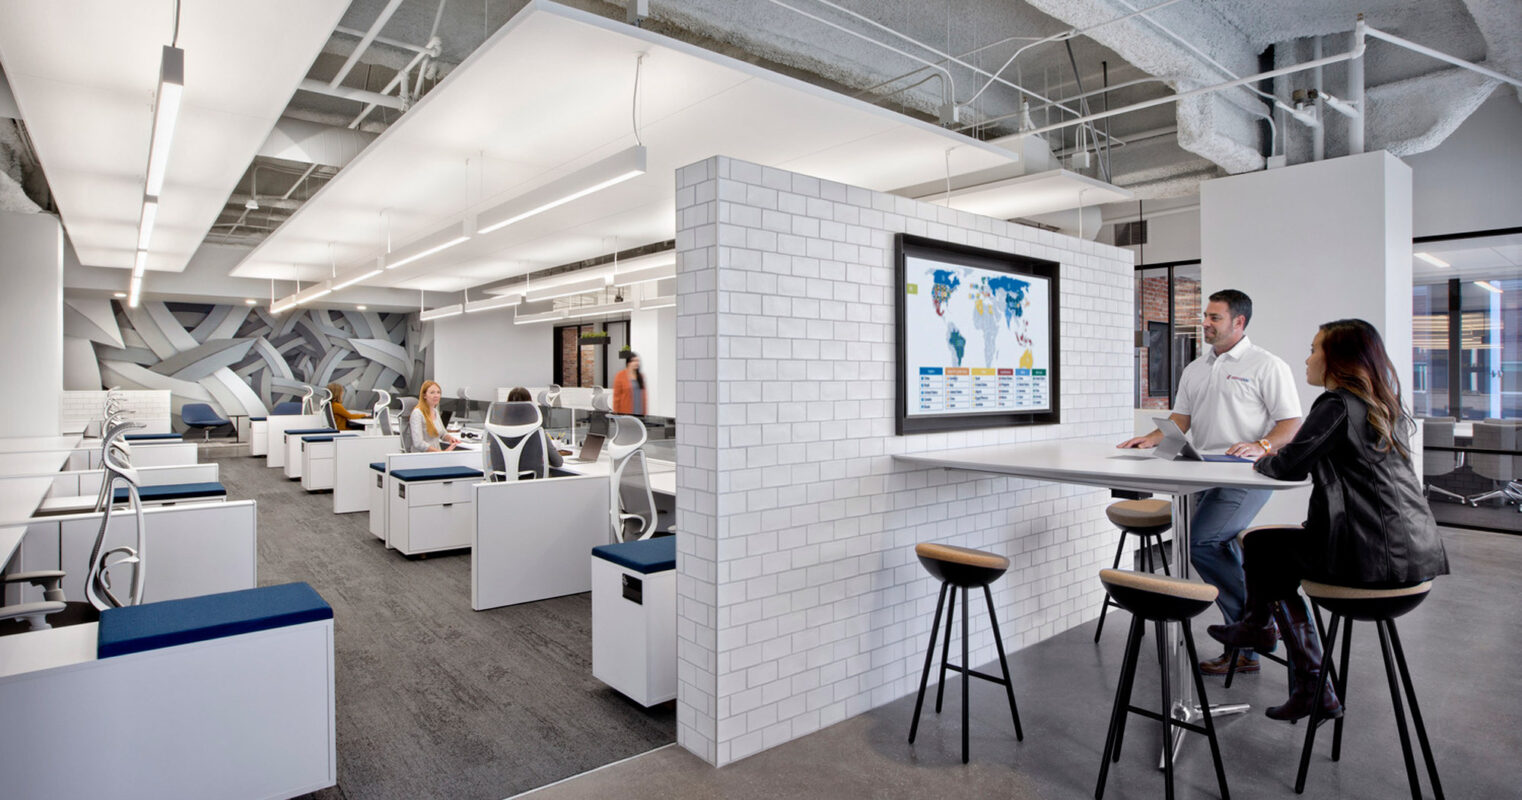 Contemporary office space with exposed ceiling showcasing industrial ductwork. The central white tiling feature wall contrasts with the raw concrete, while ergonomic furnishings and sophisticated lighting contribute to a dynamic work environment.